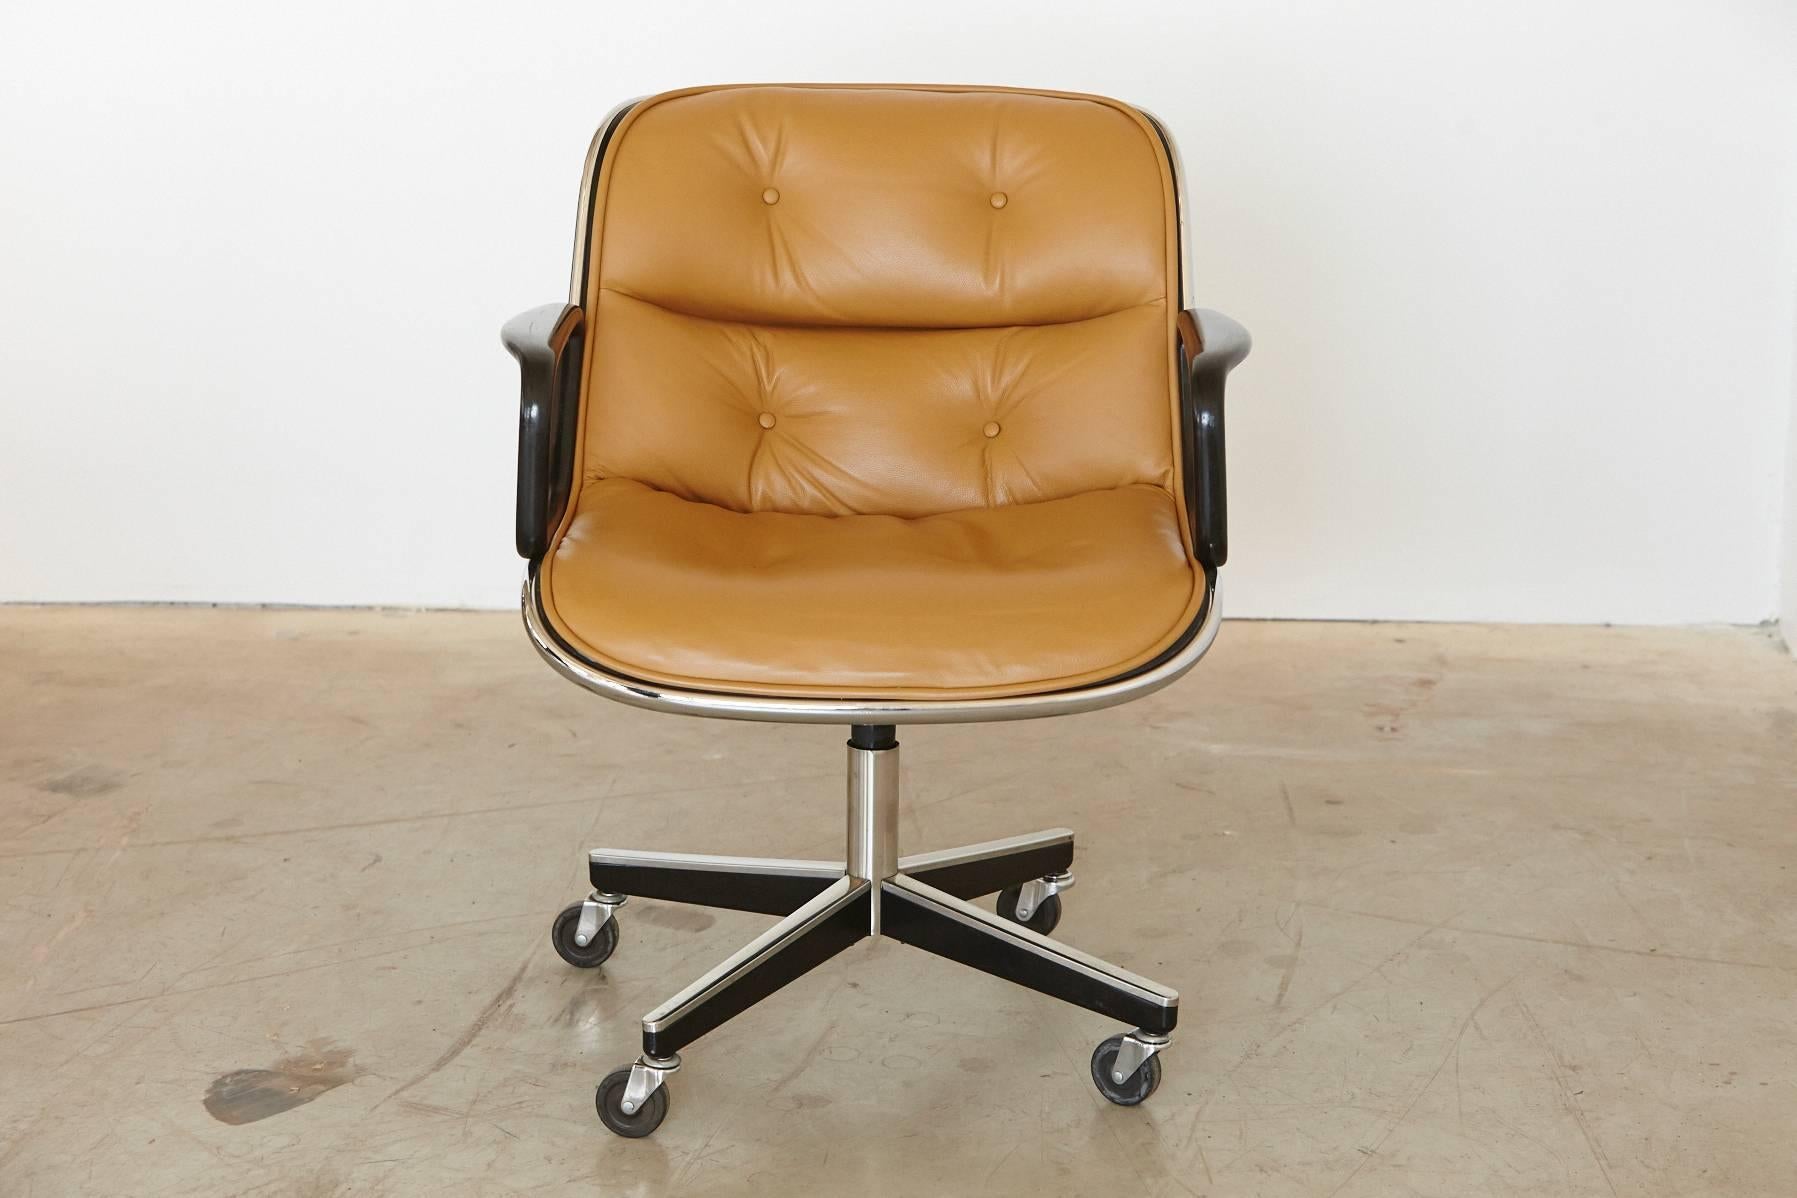 Fantastic executive chair designed by Charles Pollock for Knoll International. 
The chair is in excellent condition, the single aluminum band and outer shell are impeccable, recently upholstered in tan Edelman leather. 
The four-star chrome / black